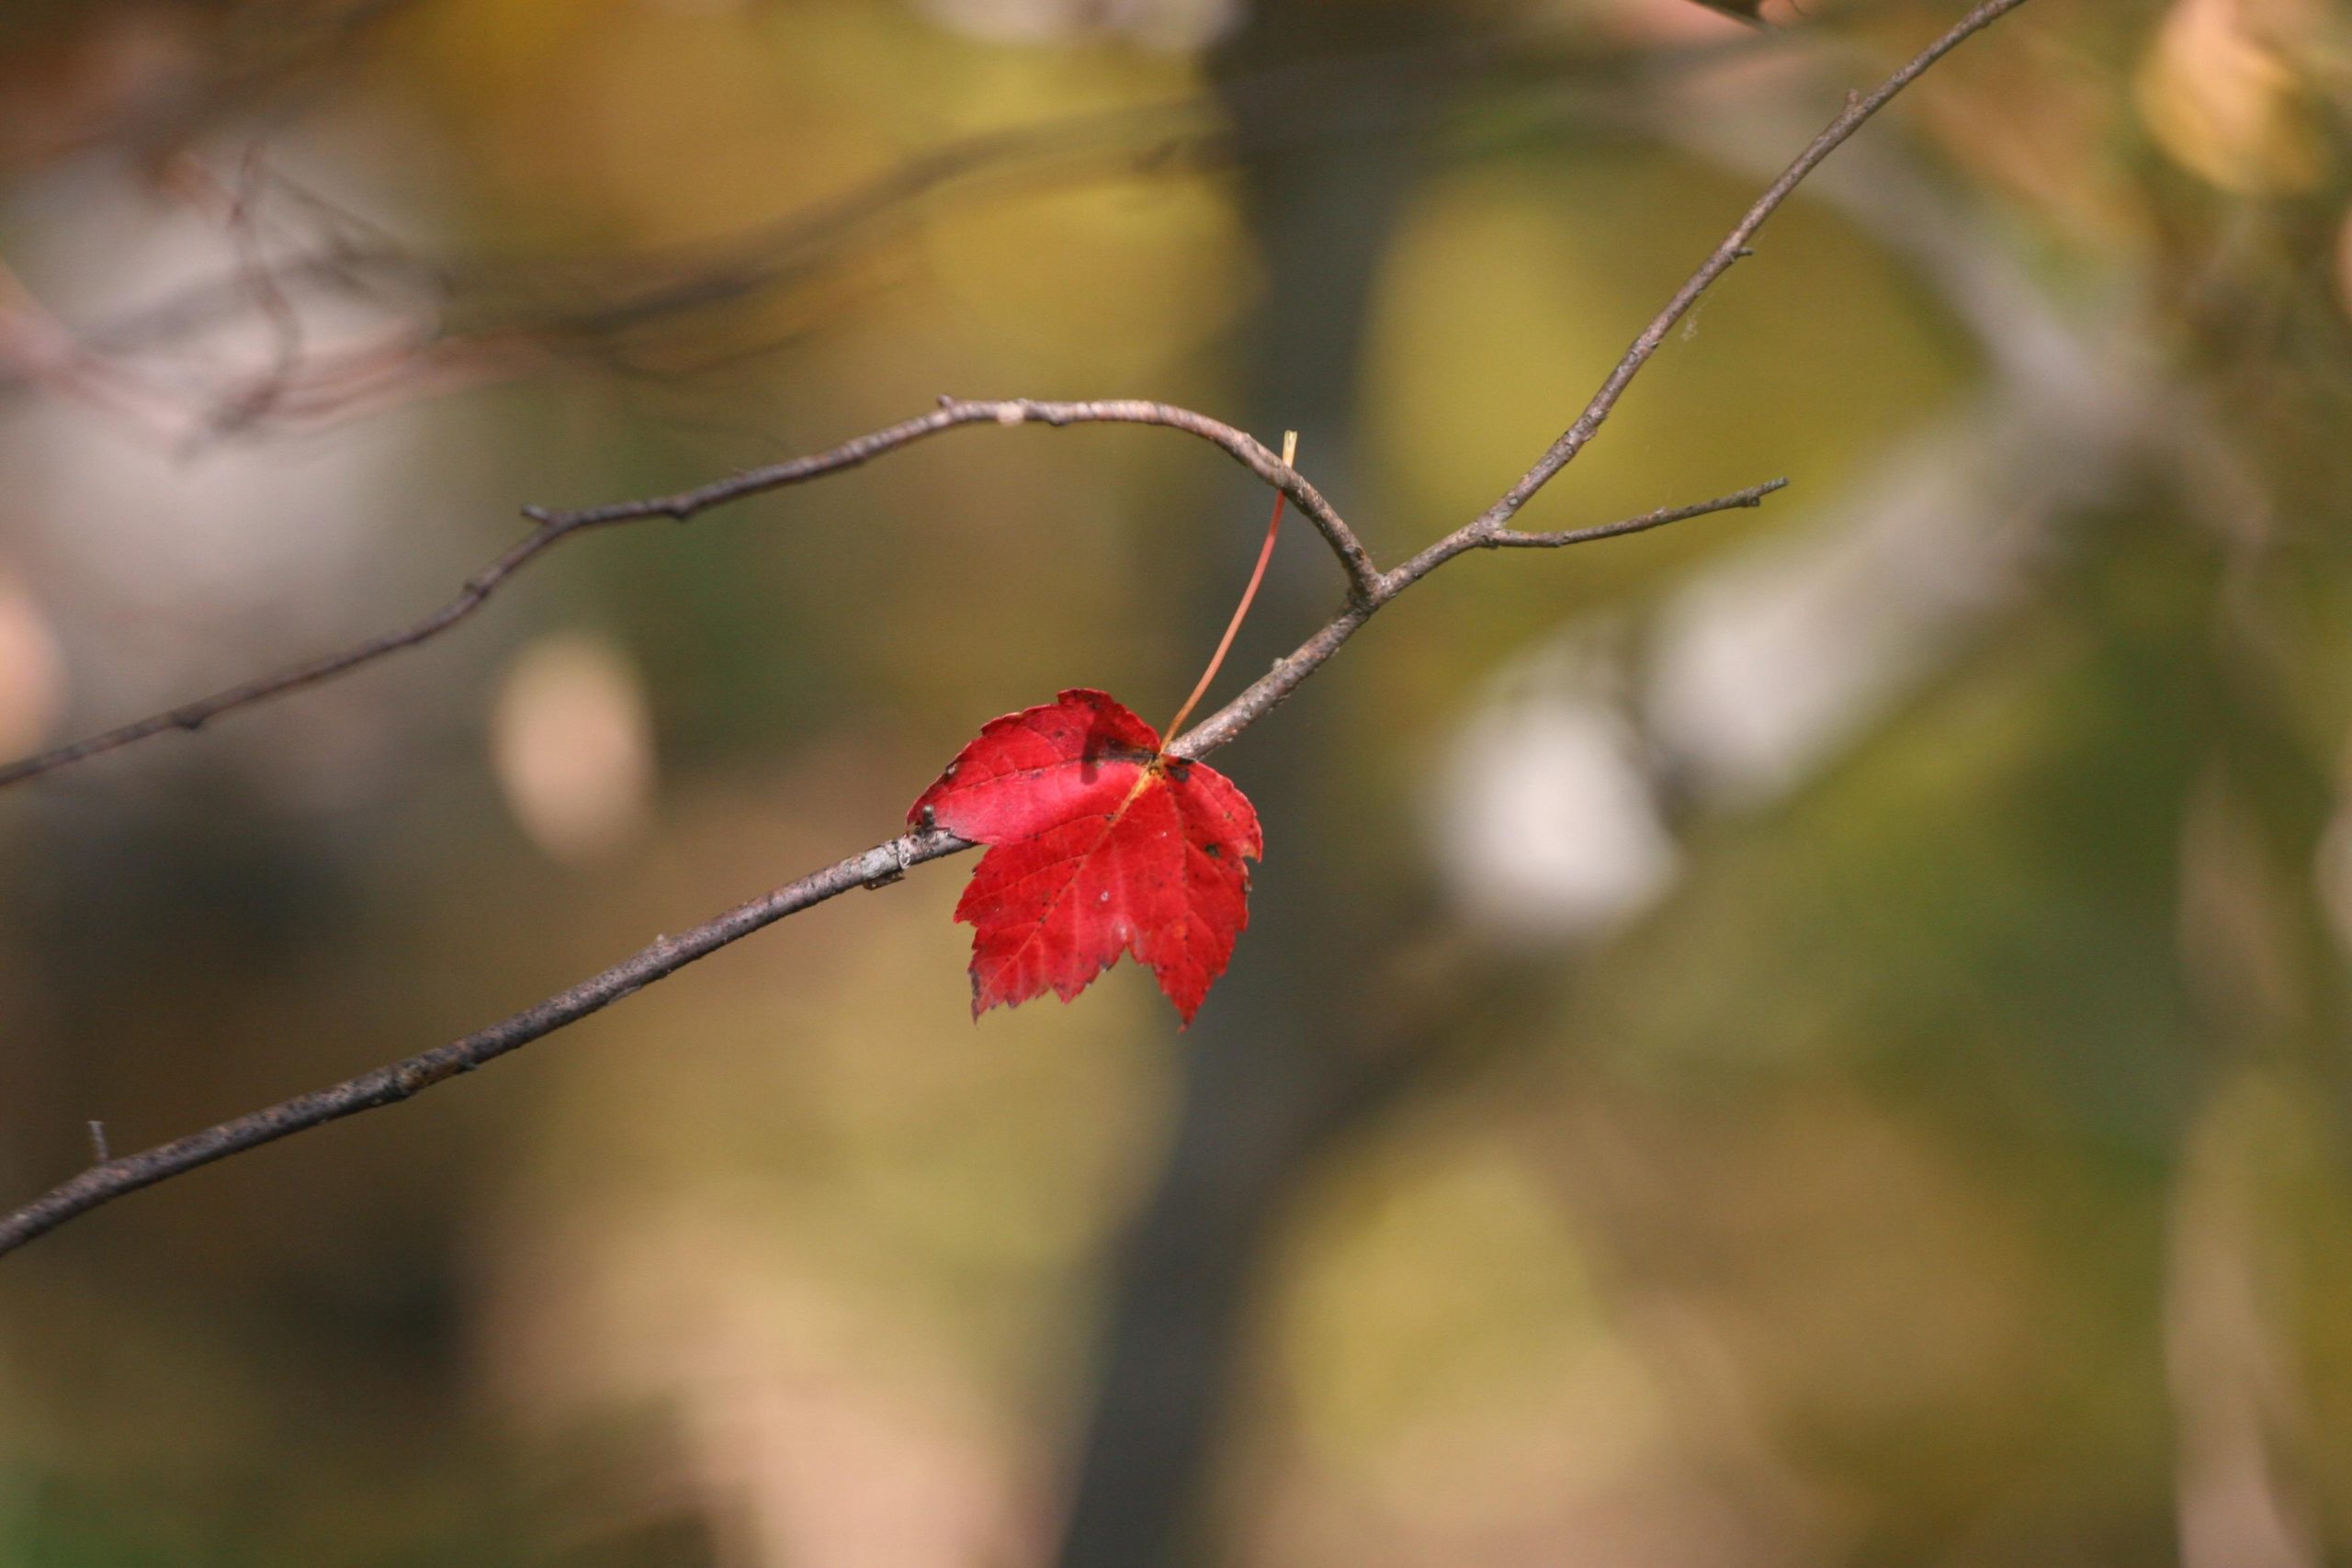 Lone Leaf (user submitted)